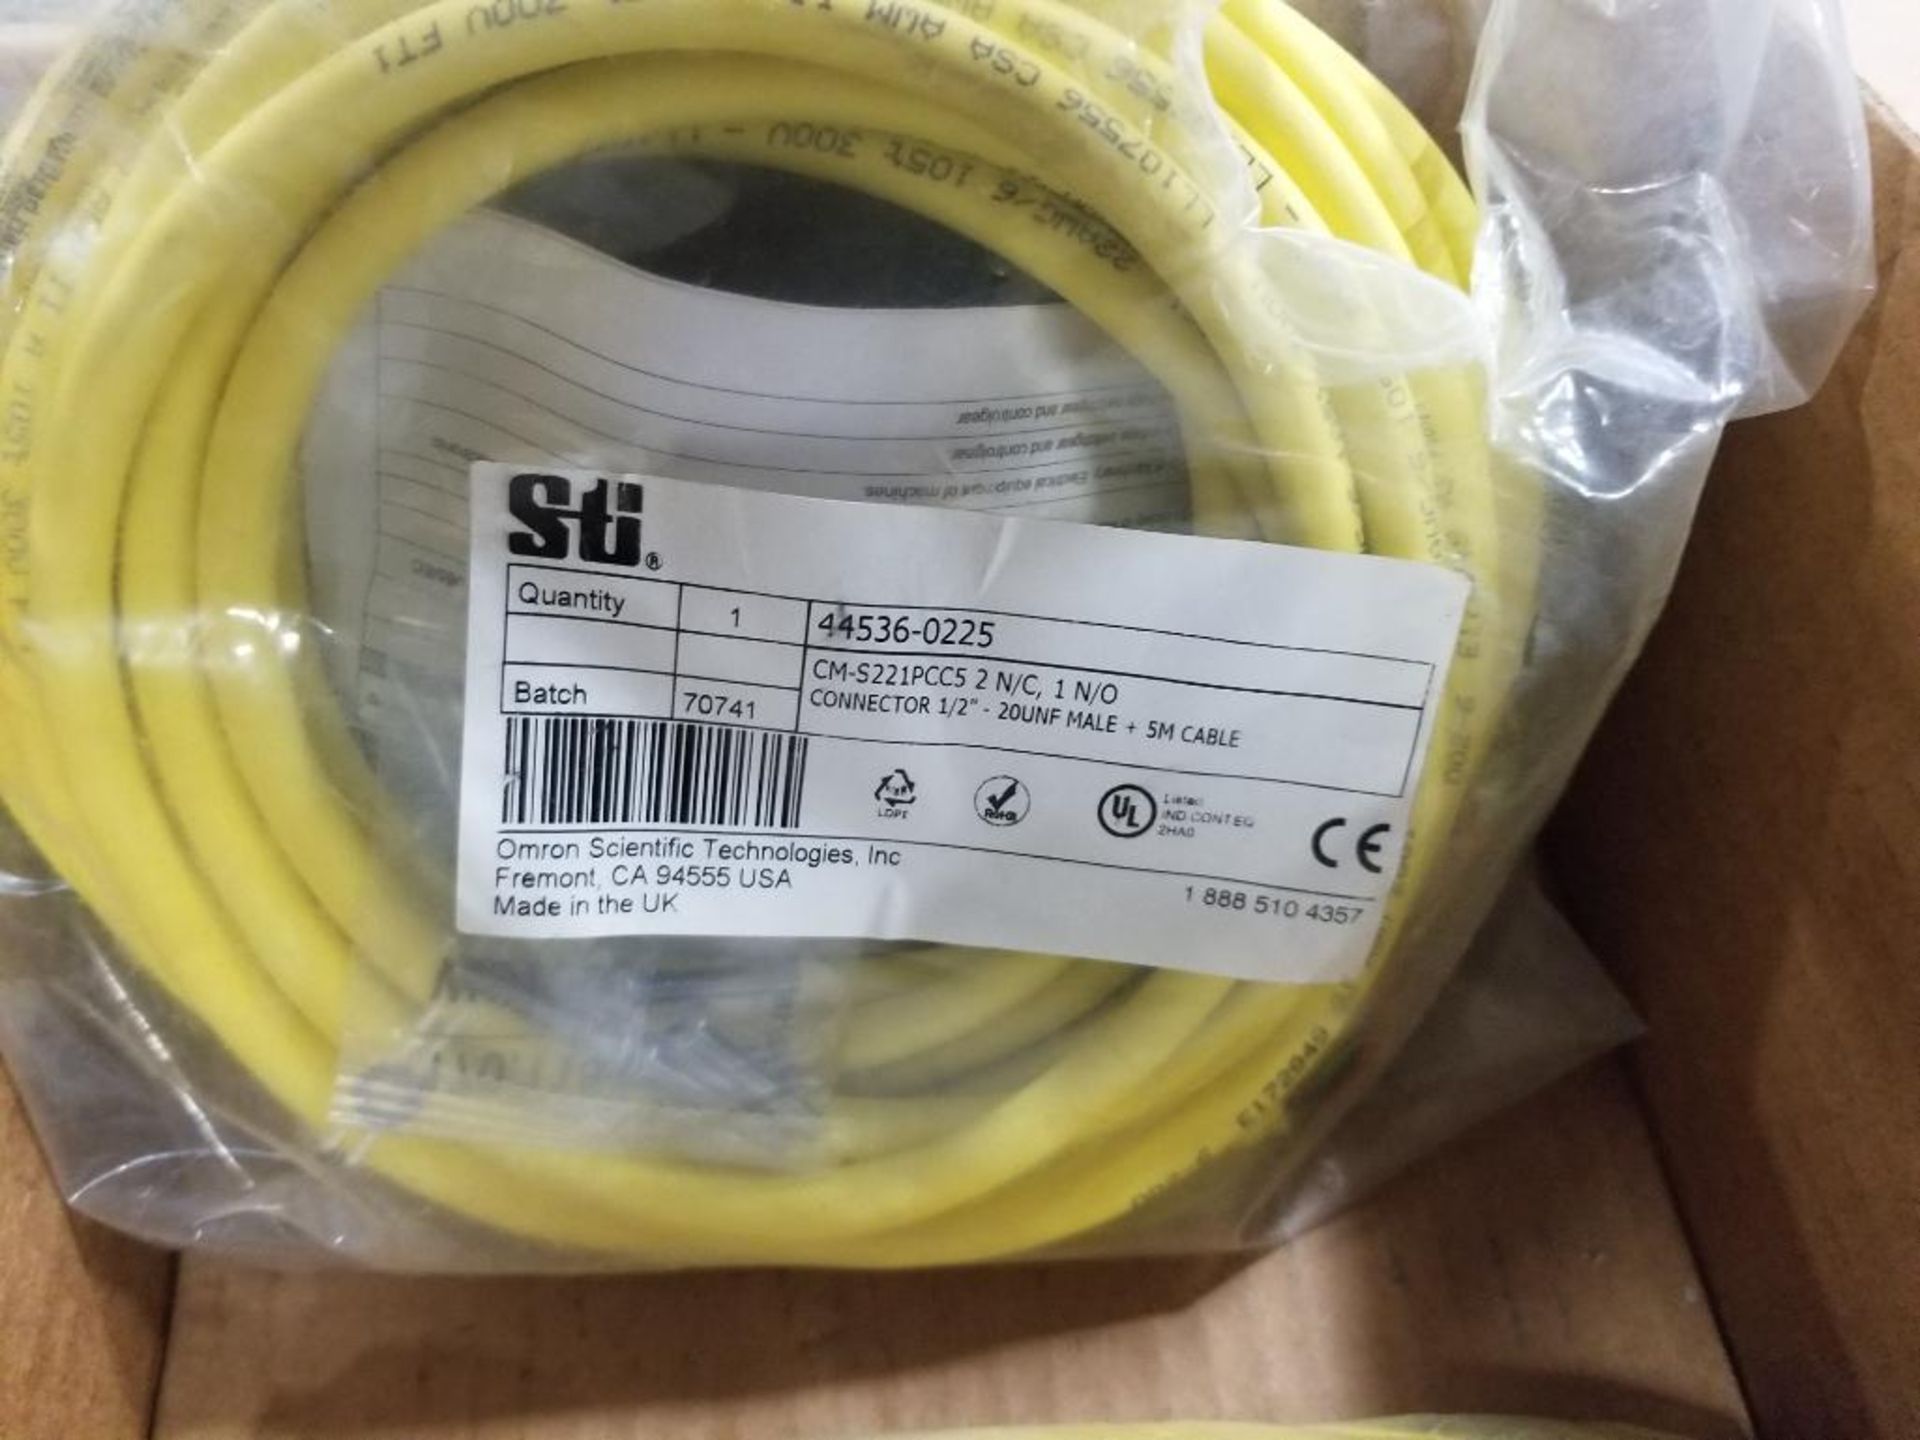 Qty 3 - STI 44536-0225 cordset. New in package. - Image 6 of 9